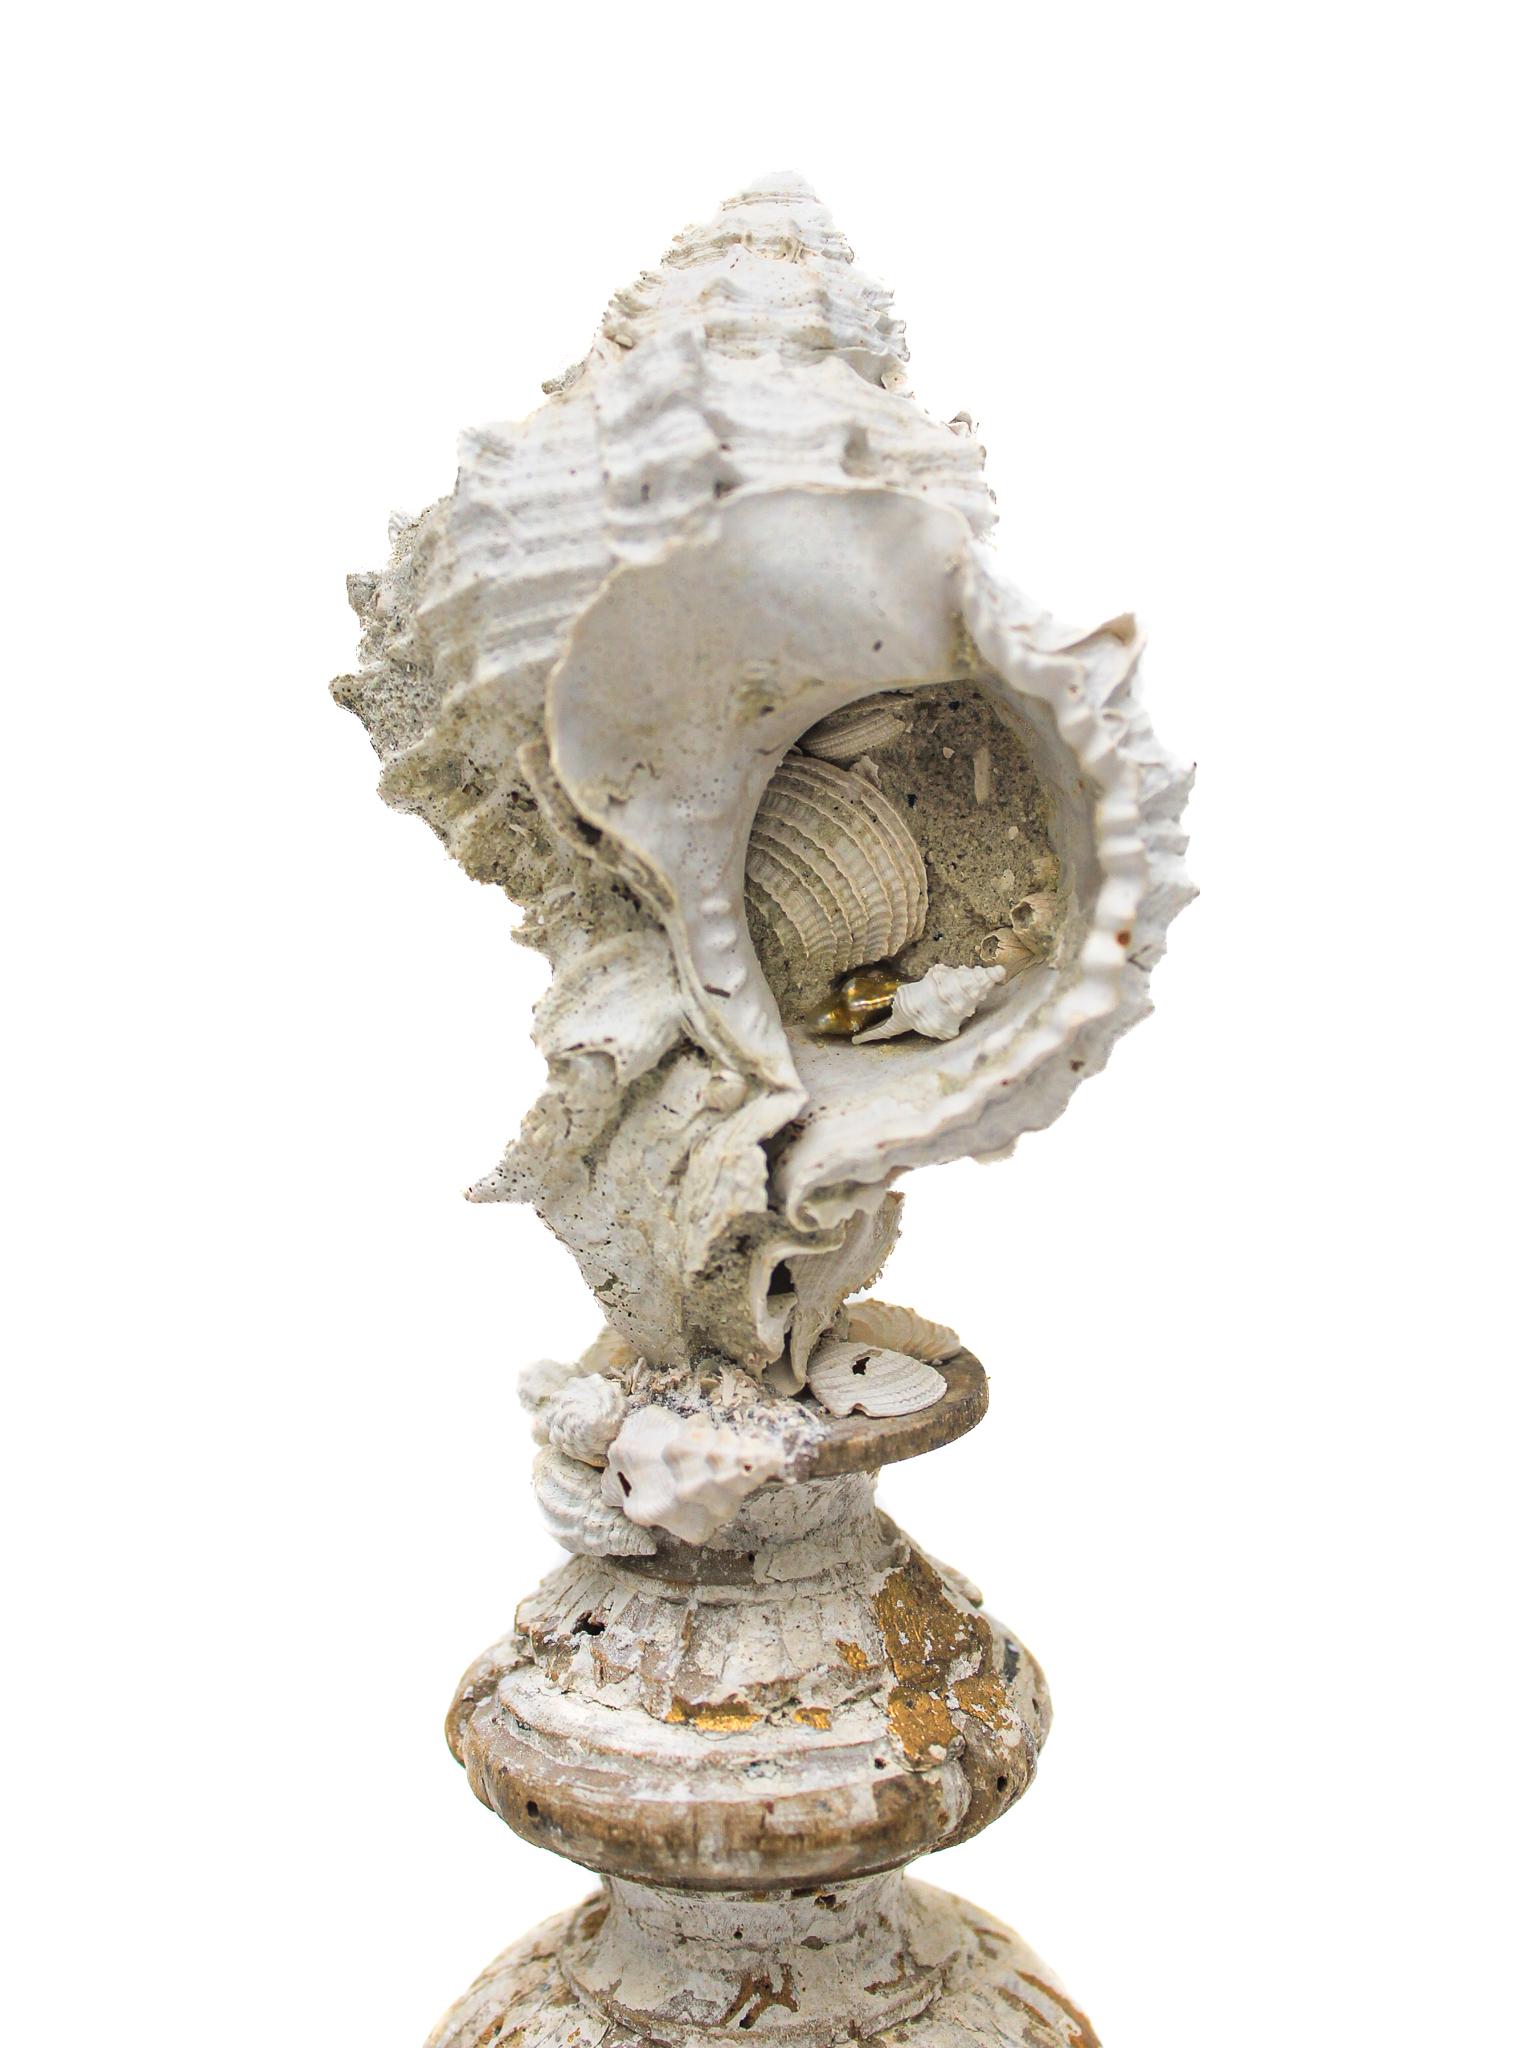 Hand-Carved 17th Century Italian Vase with a Hystrivasum Shell on an Antique Metal Stand